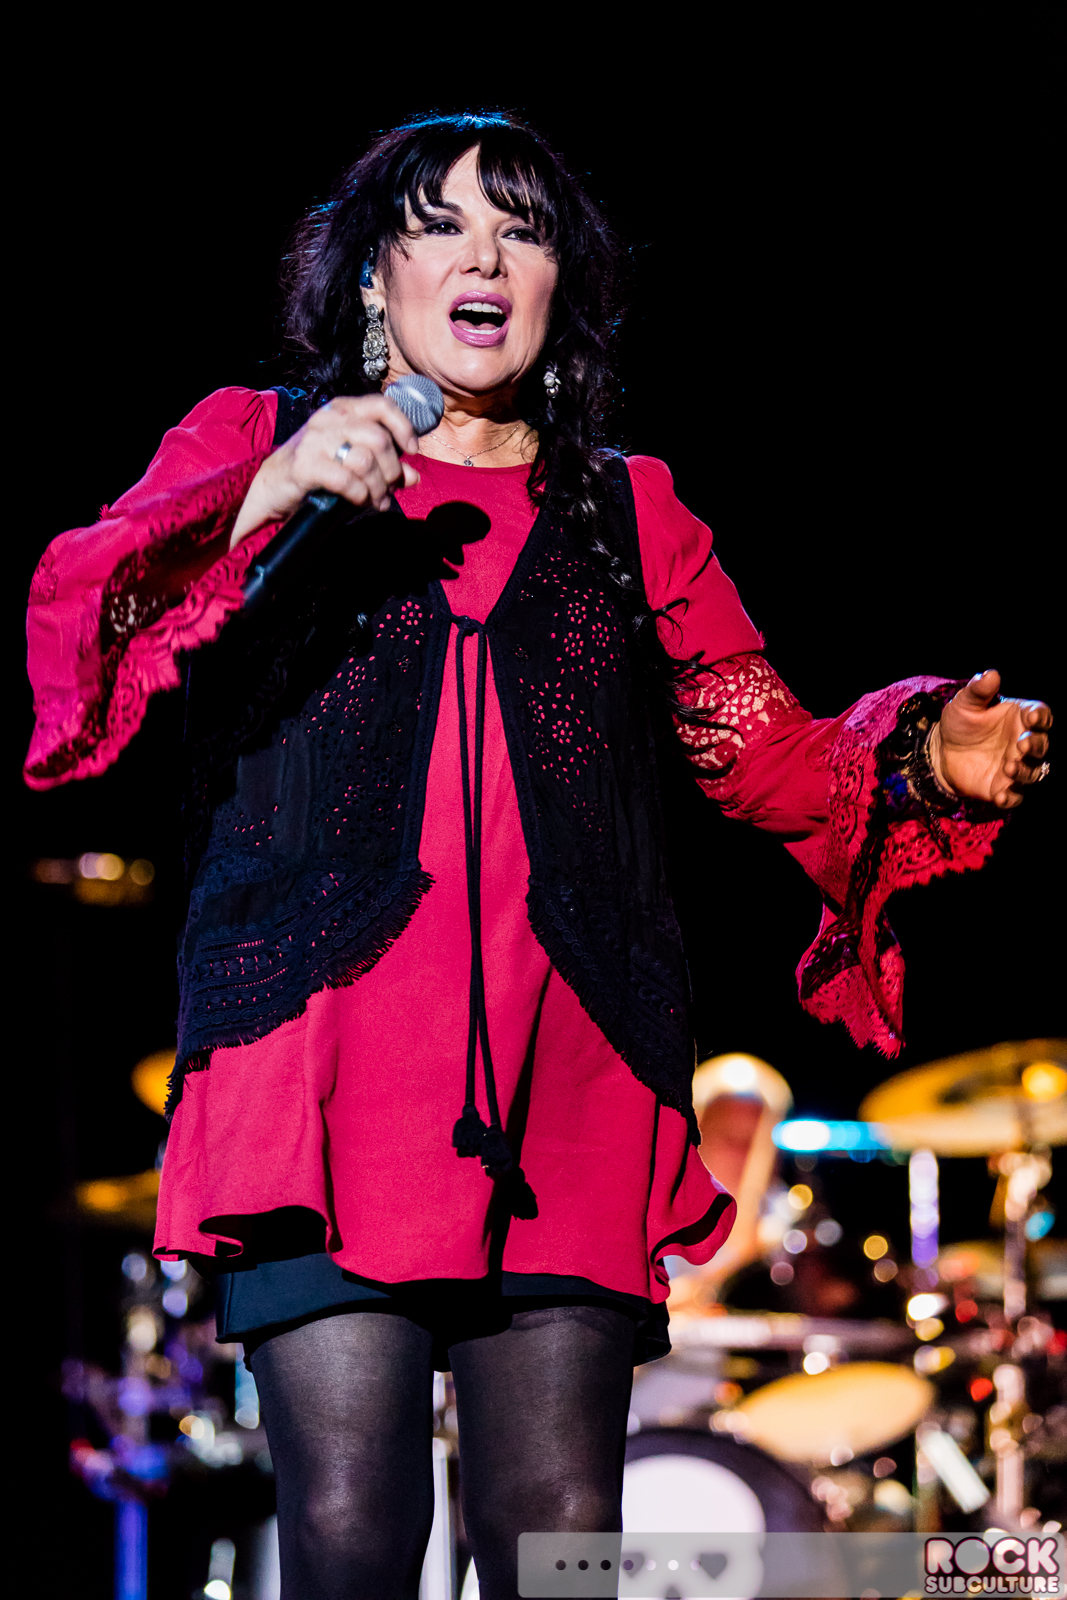 Heart at Thunder Valley Outdoor Amphitheater | Lincoln, California | 9/18/2015 ...